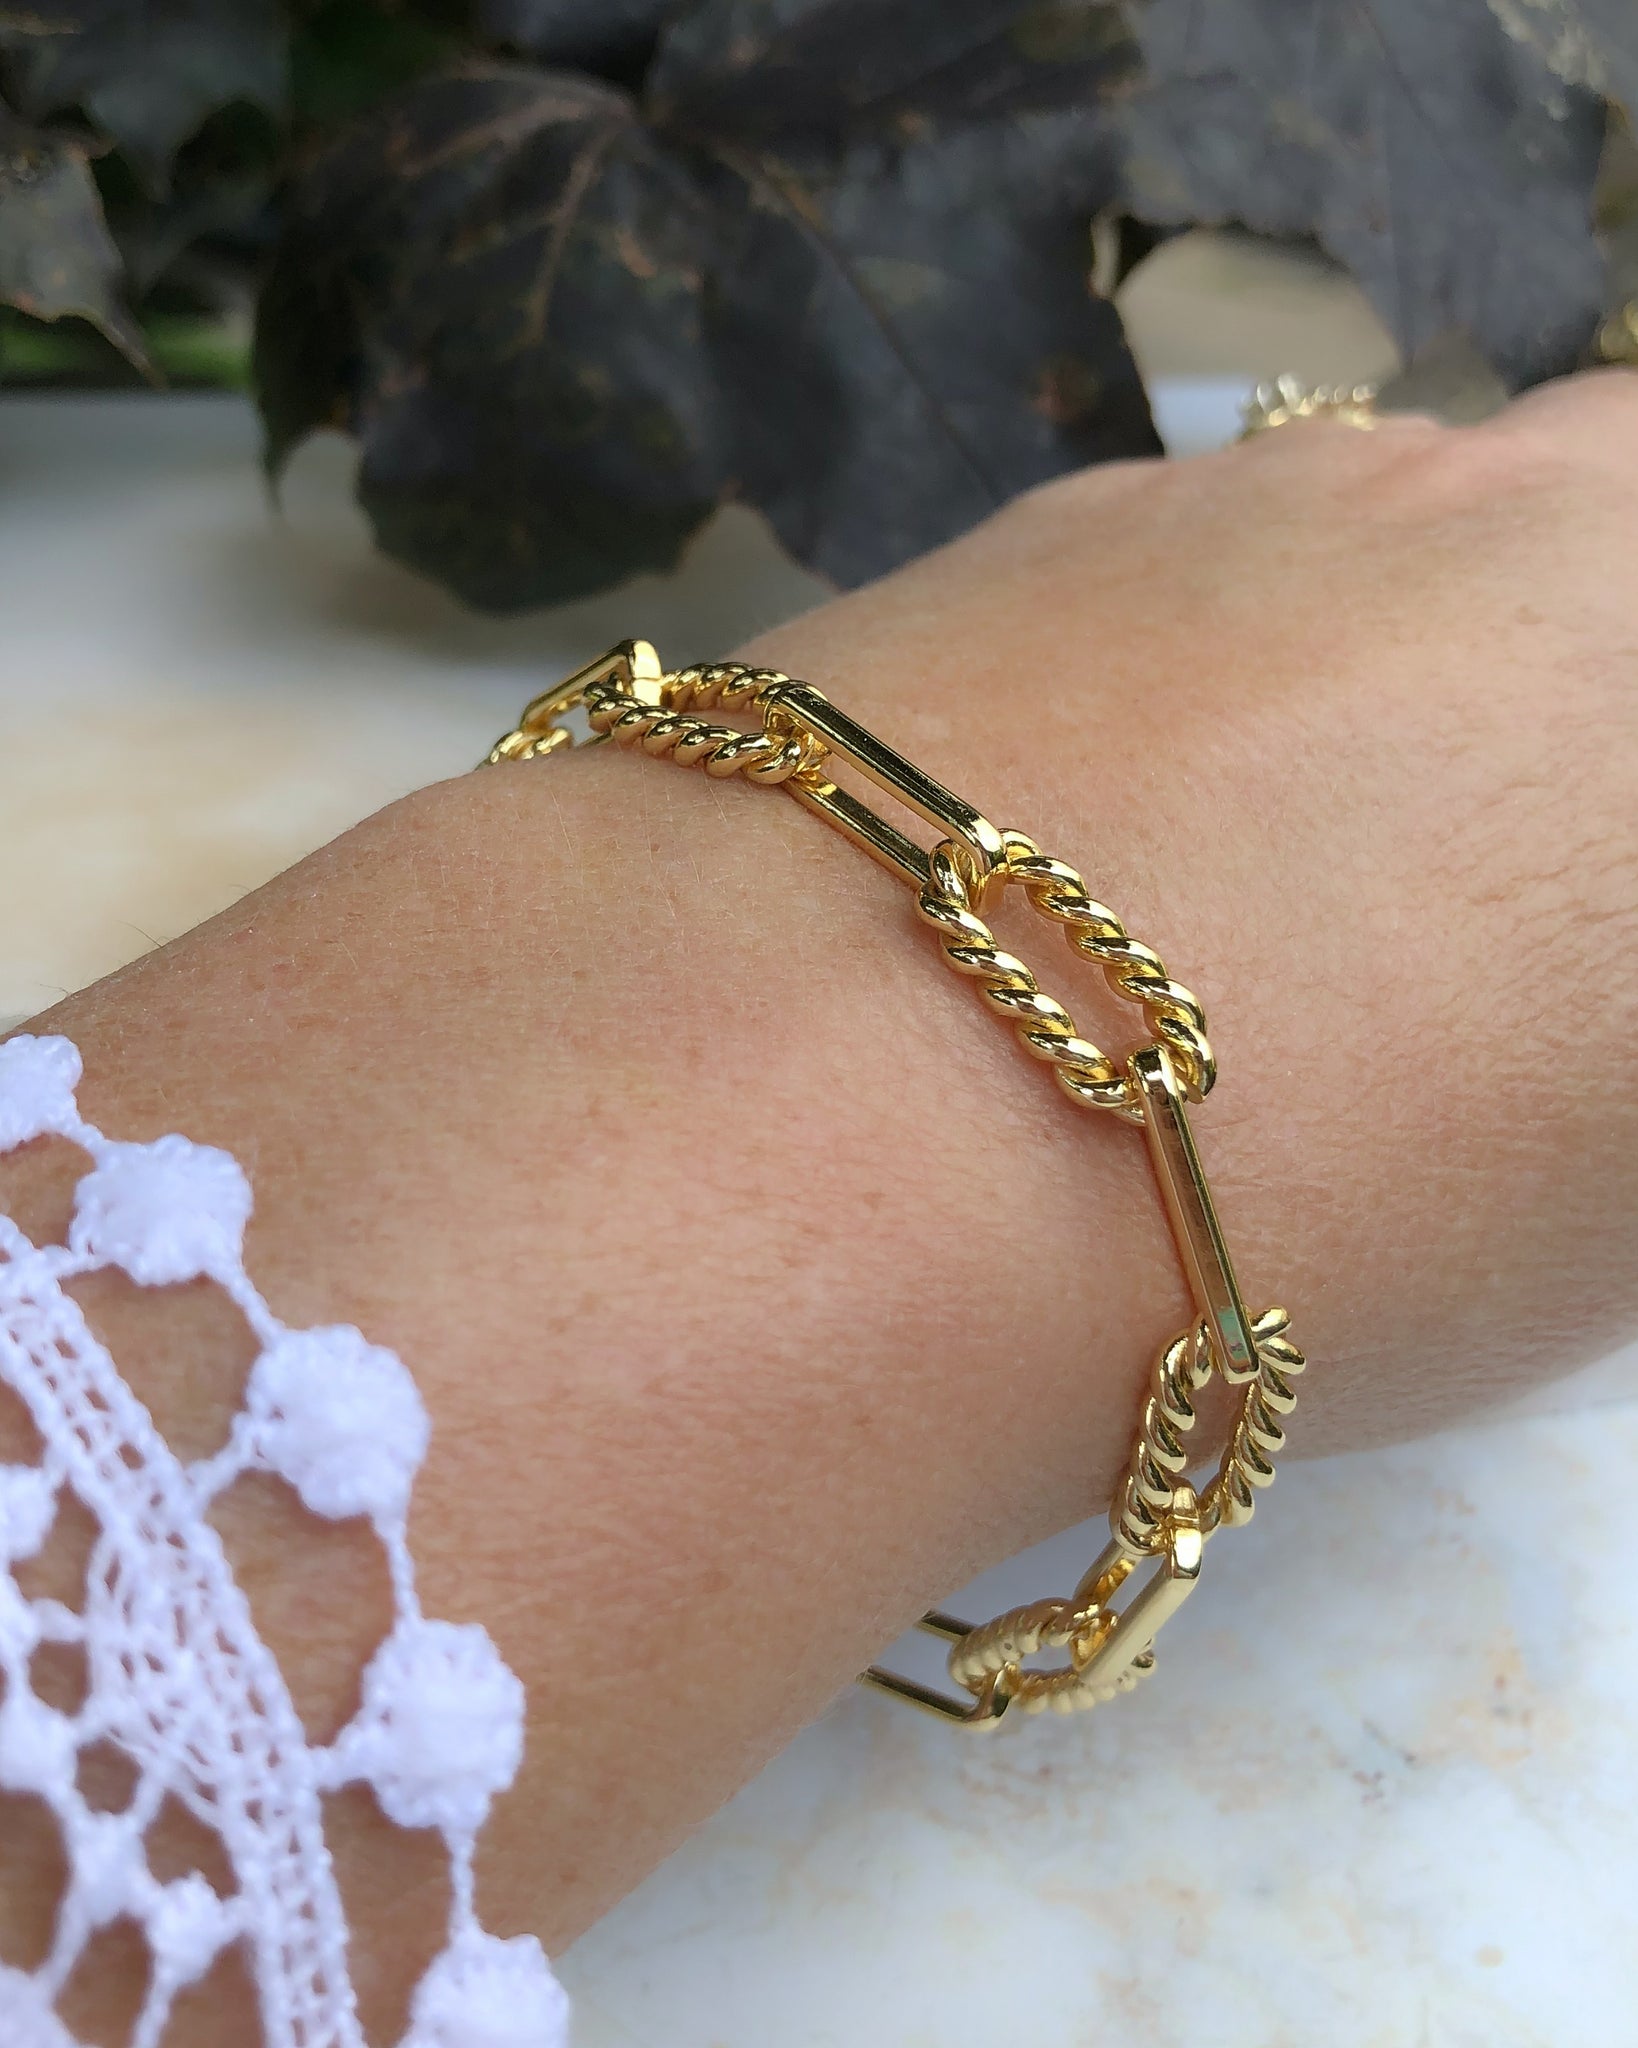 Medium Weight Gold Chain Bracelet with Magnet Clasp